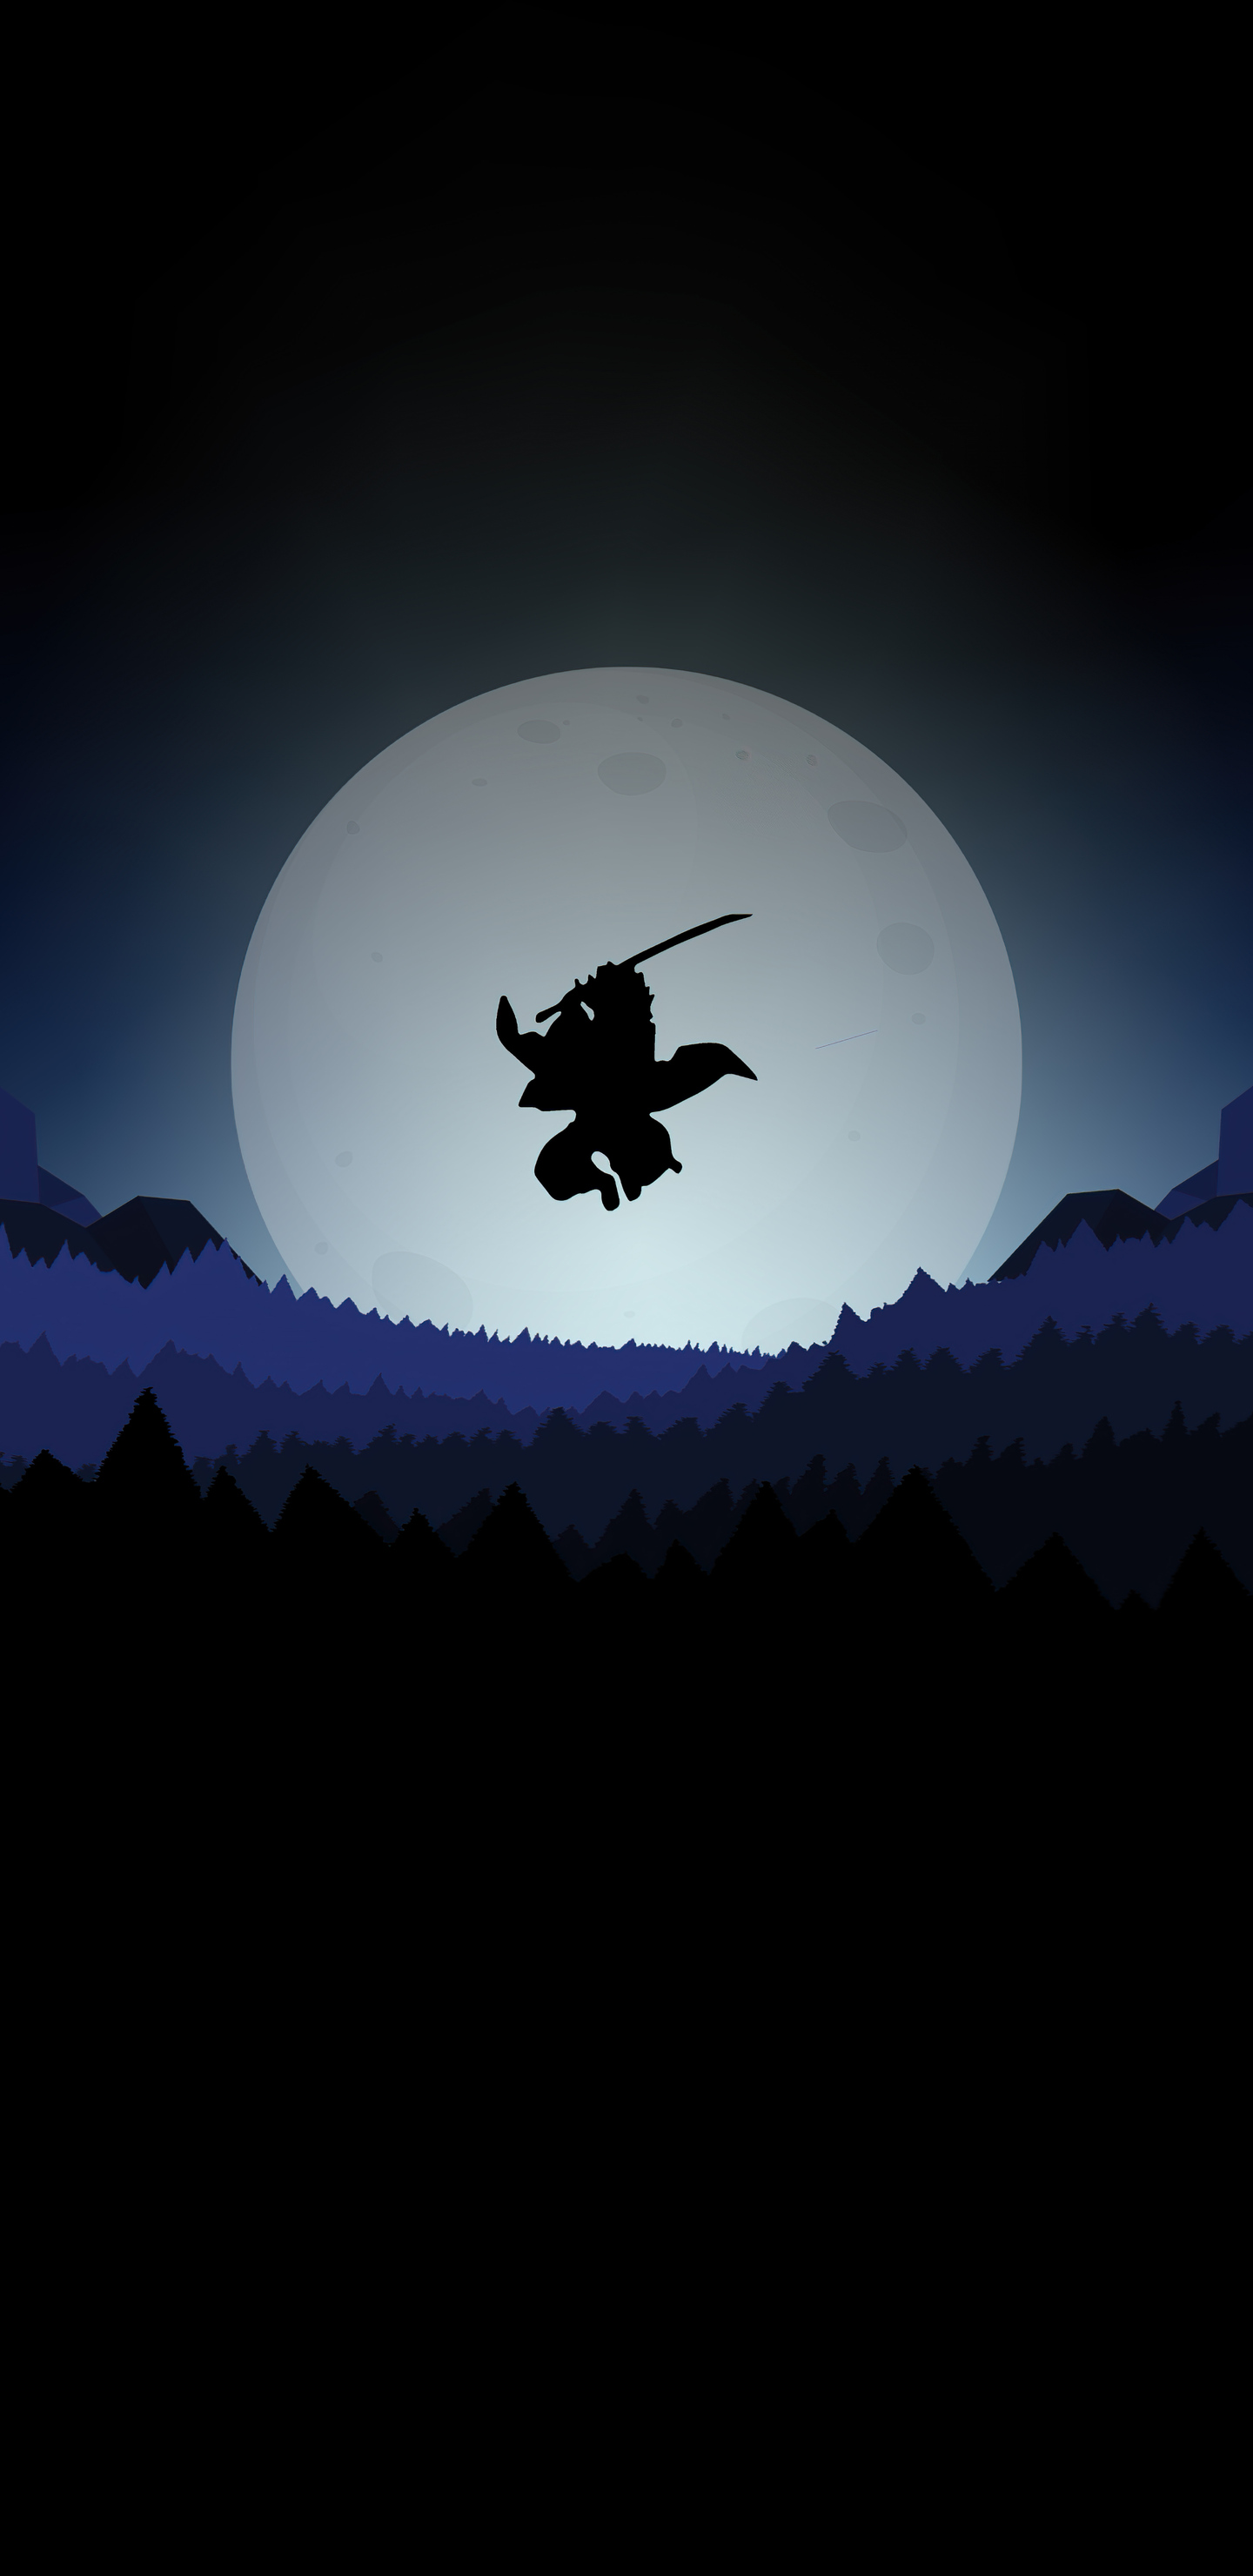 1440x2960 Demon Slayer Minimal 4k Samsung Galaxy Note 9,8, S9,S8,S8+ QHD HD  4k Wallpapers, Images, Backgrounds, Photos and Pictures